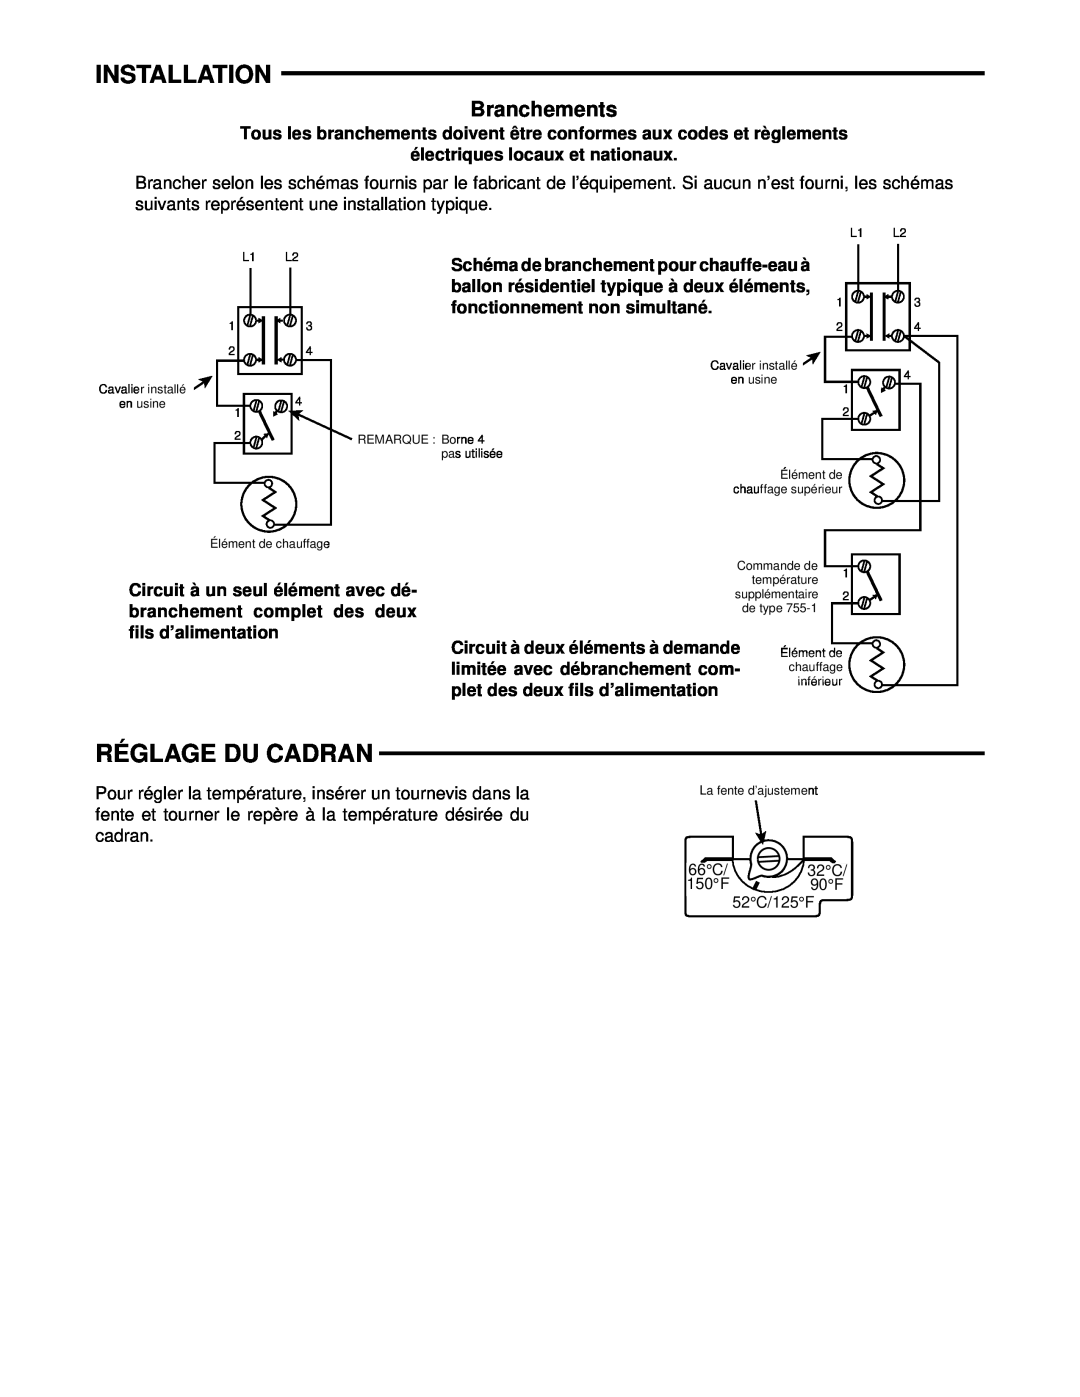 White Rodgers 756-50 specifications Réglage Du Cadran, Branchements, Installation 